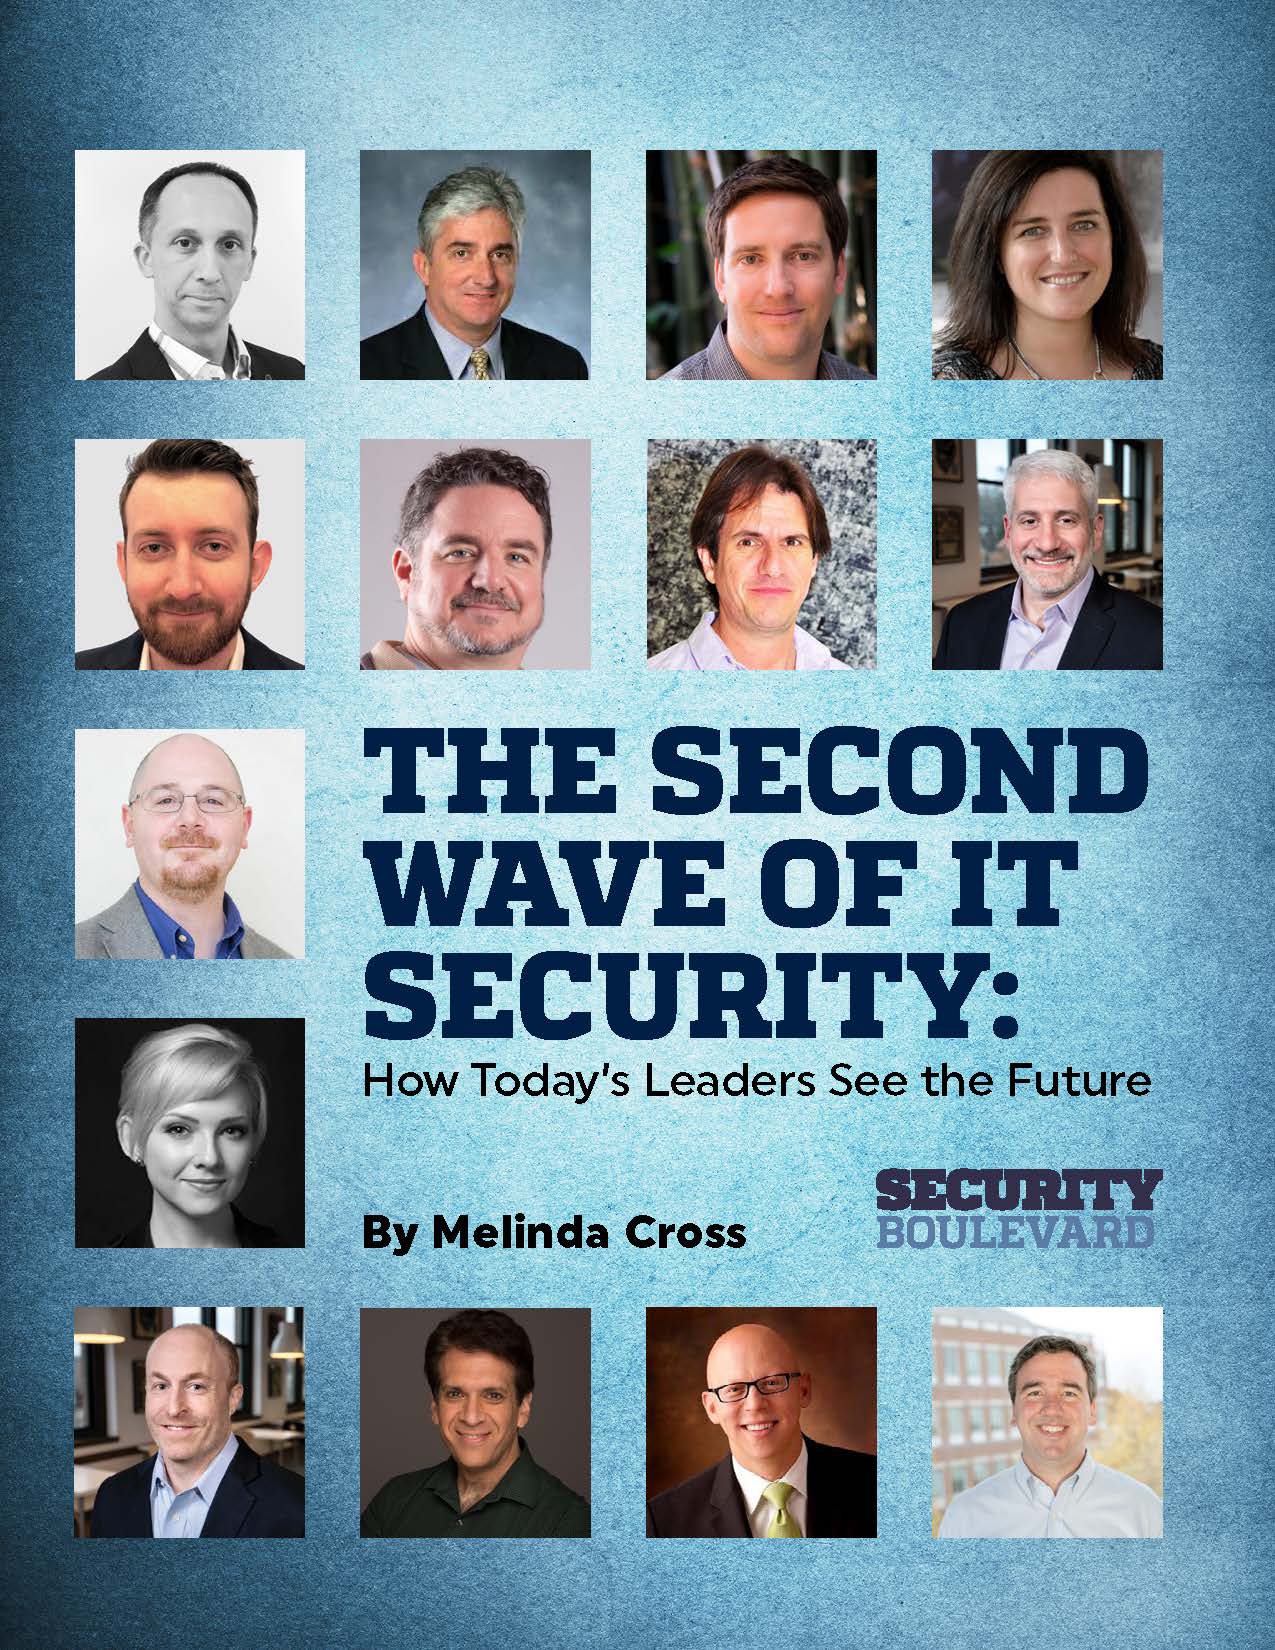 The Second Wave of IT Security